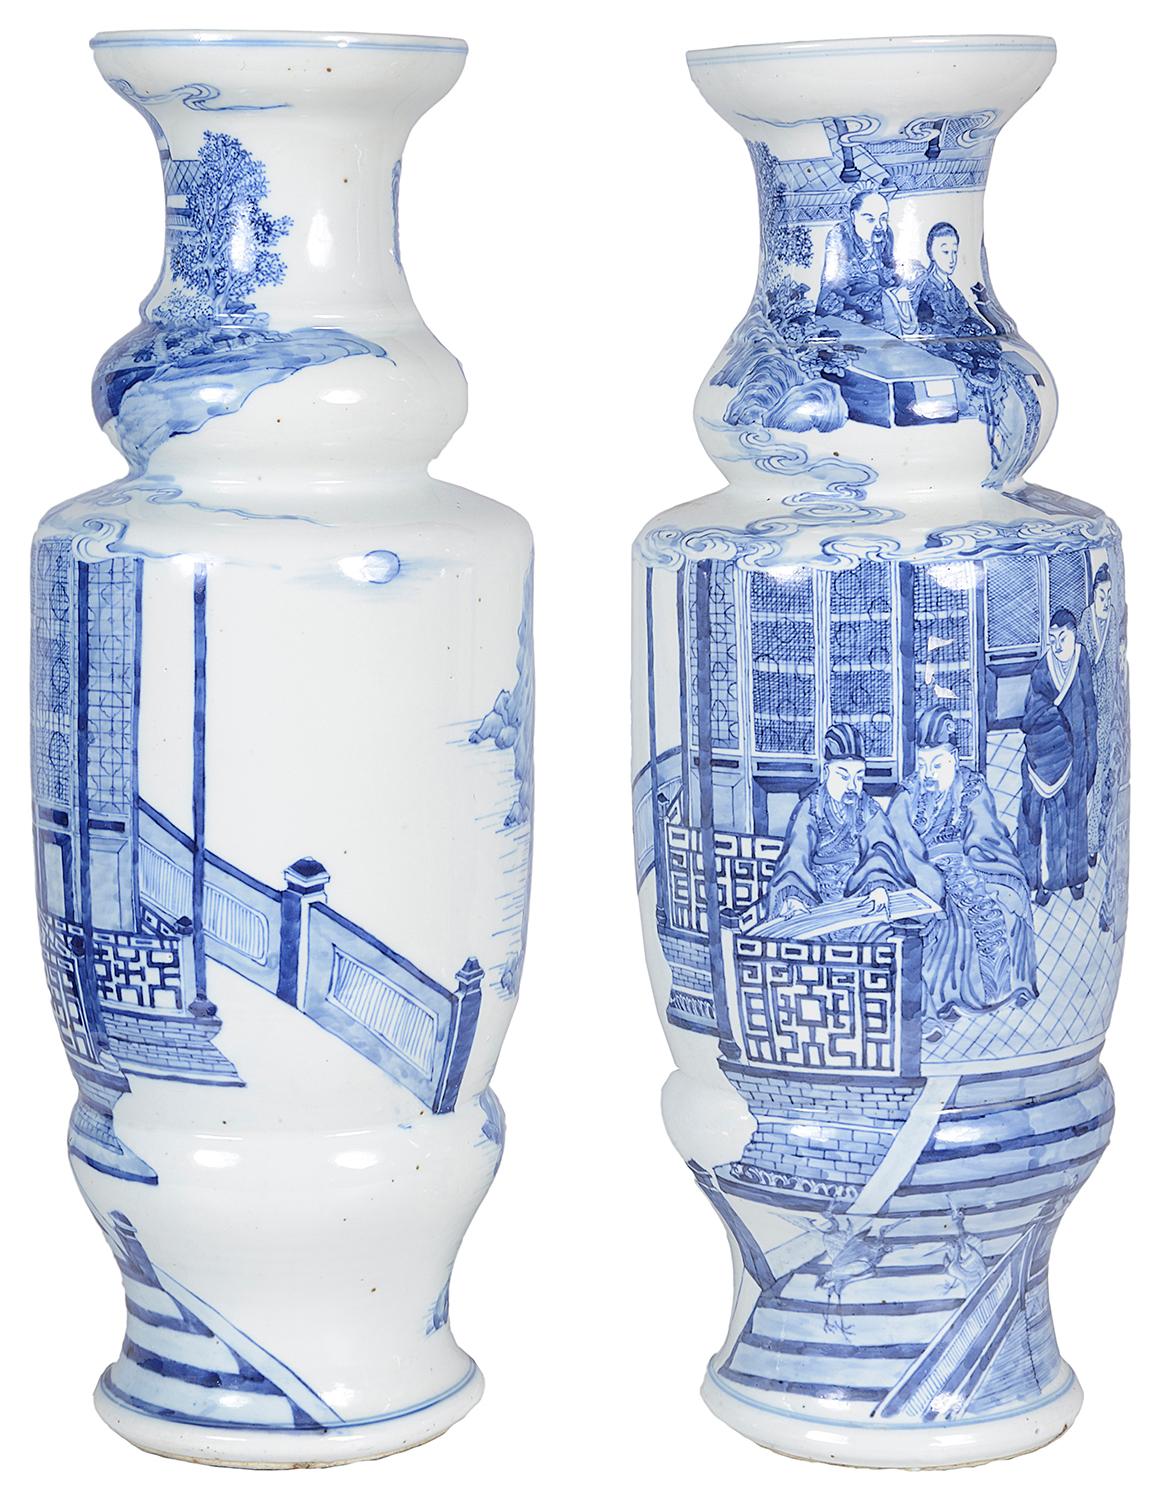 A very impressive pair of 20th century Chinese blue and white vases. Each having painted scenes of courtiers seated with attendants around.
We can arrange to have these vases lamped within the price if needs be. Image attached with example of lamp